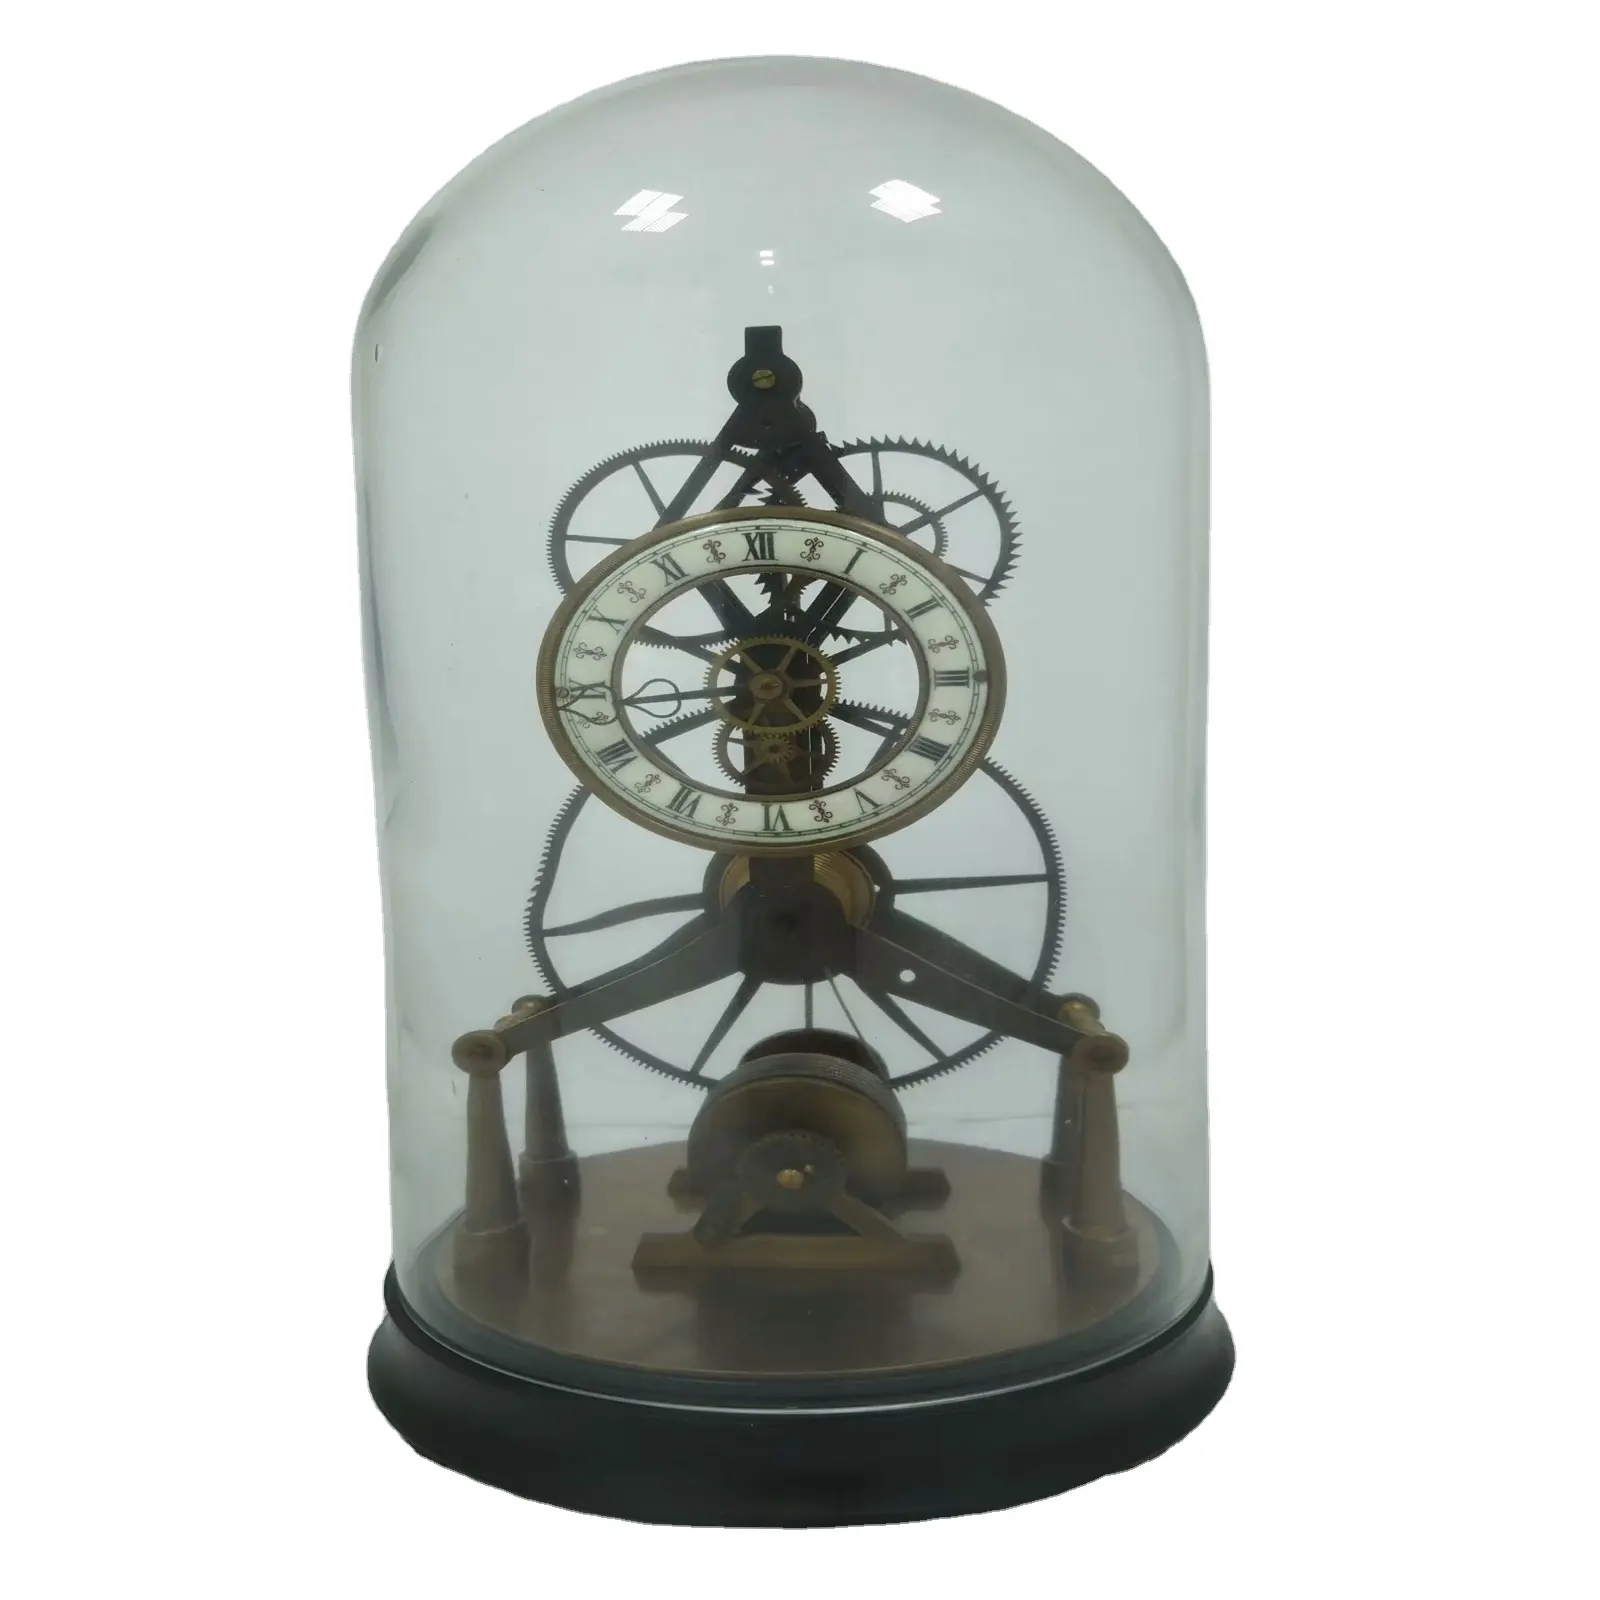 LG Imitated from French Antique Round Fusee Skeleton Clock with glass cover & mahogany wood base JGG-01